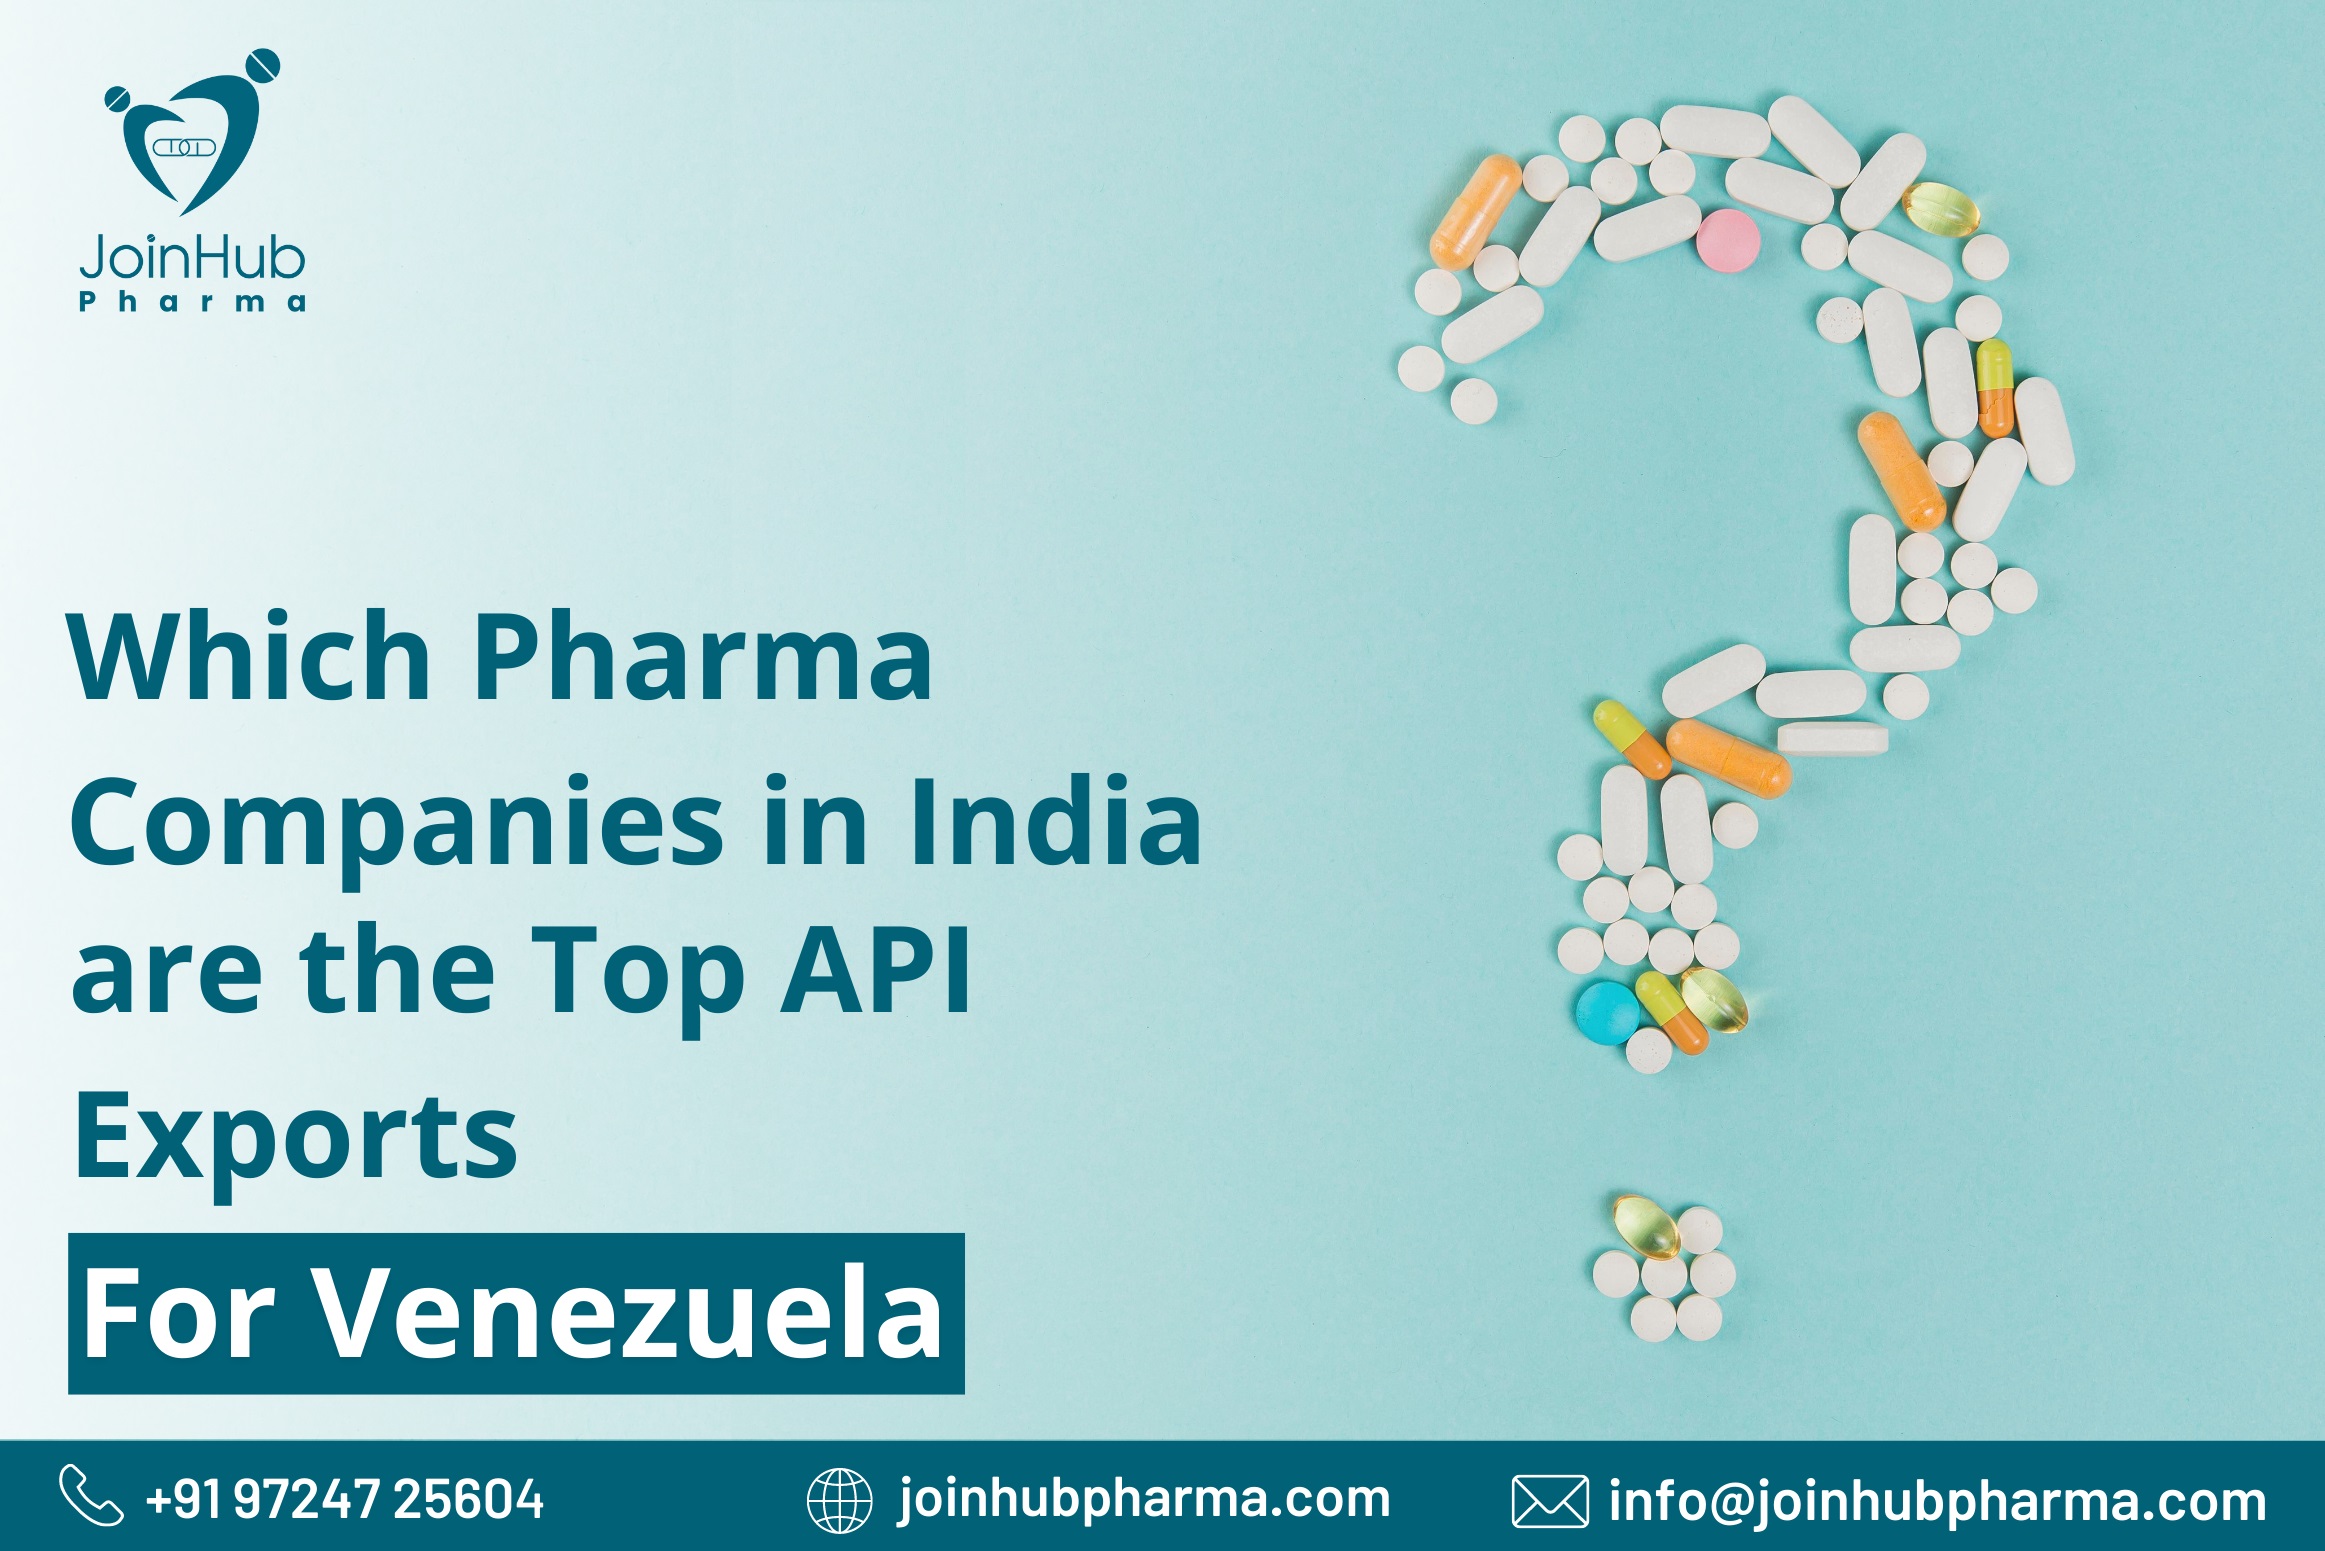 Which pharma companies in India are the top API exports for Venezuela?